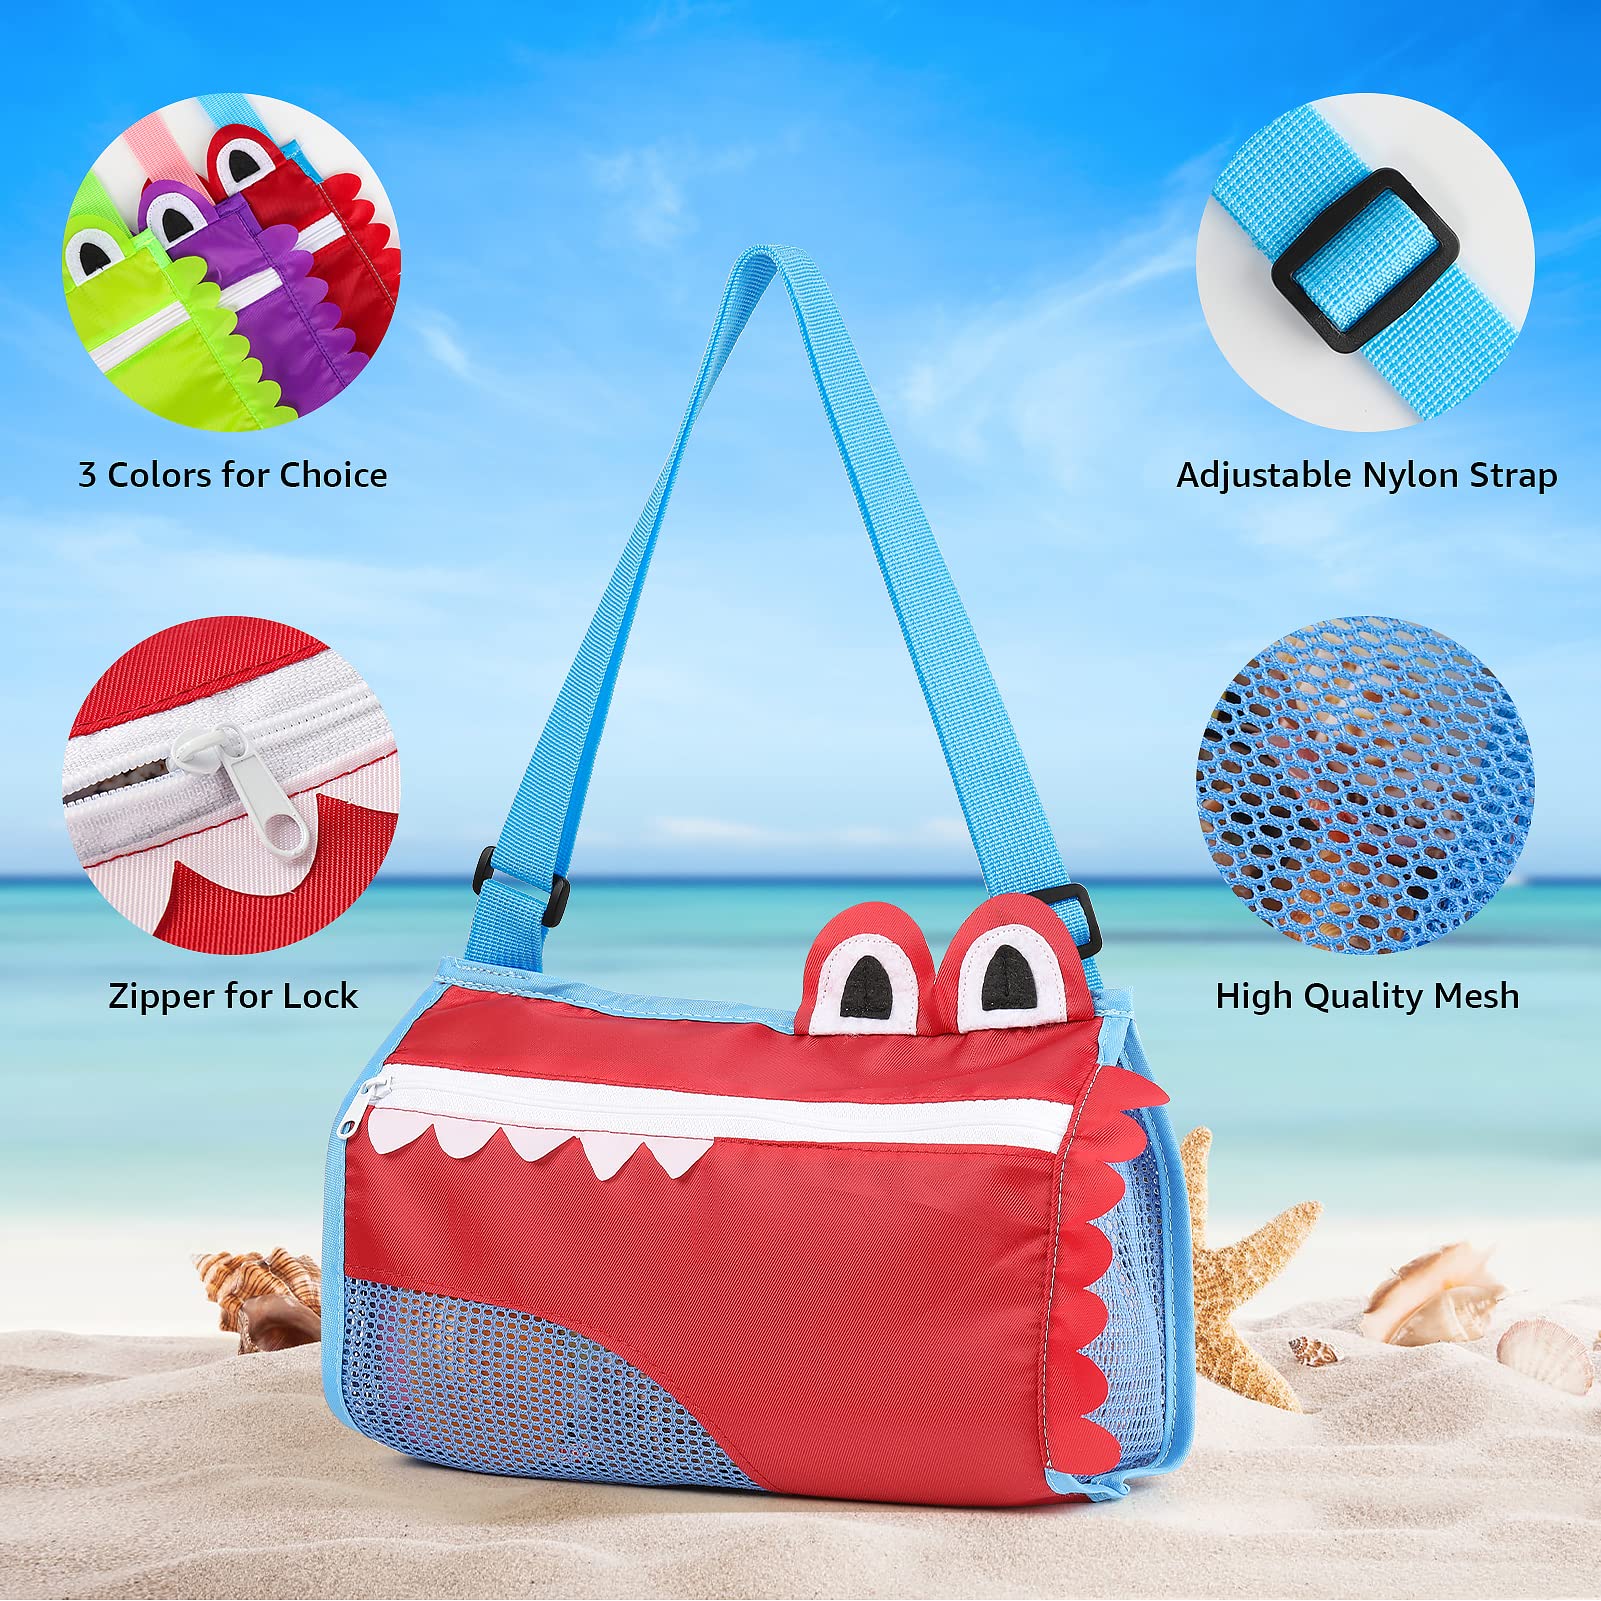 HOMETALL Beach Toys Mesh Beach Bags for Holding Beach Shell,Kids Beach Essentials Must Haves Tools, Boys and Girls Shelling Sand